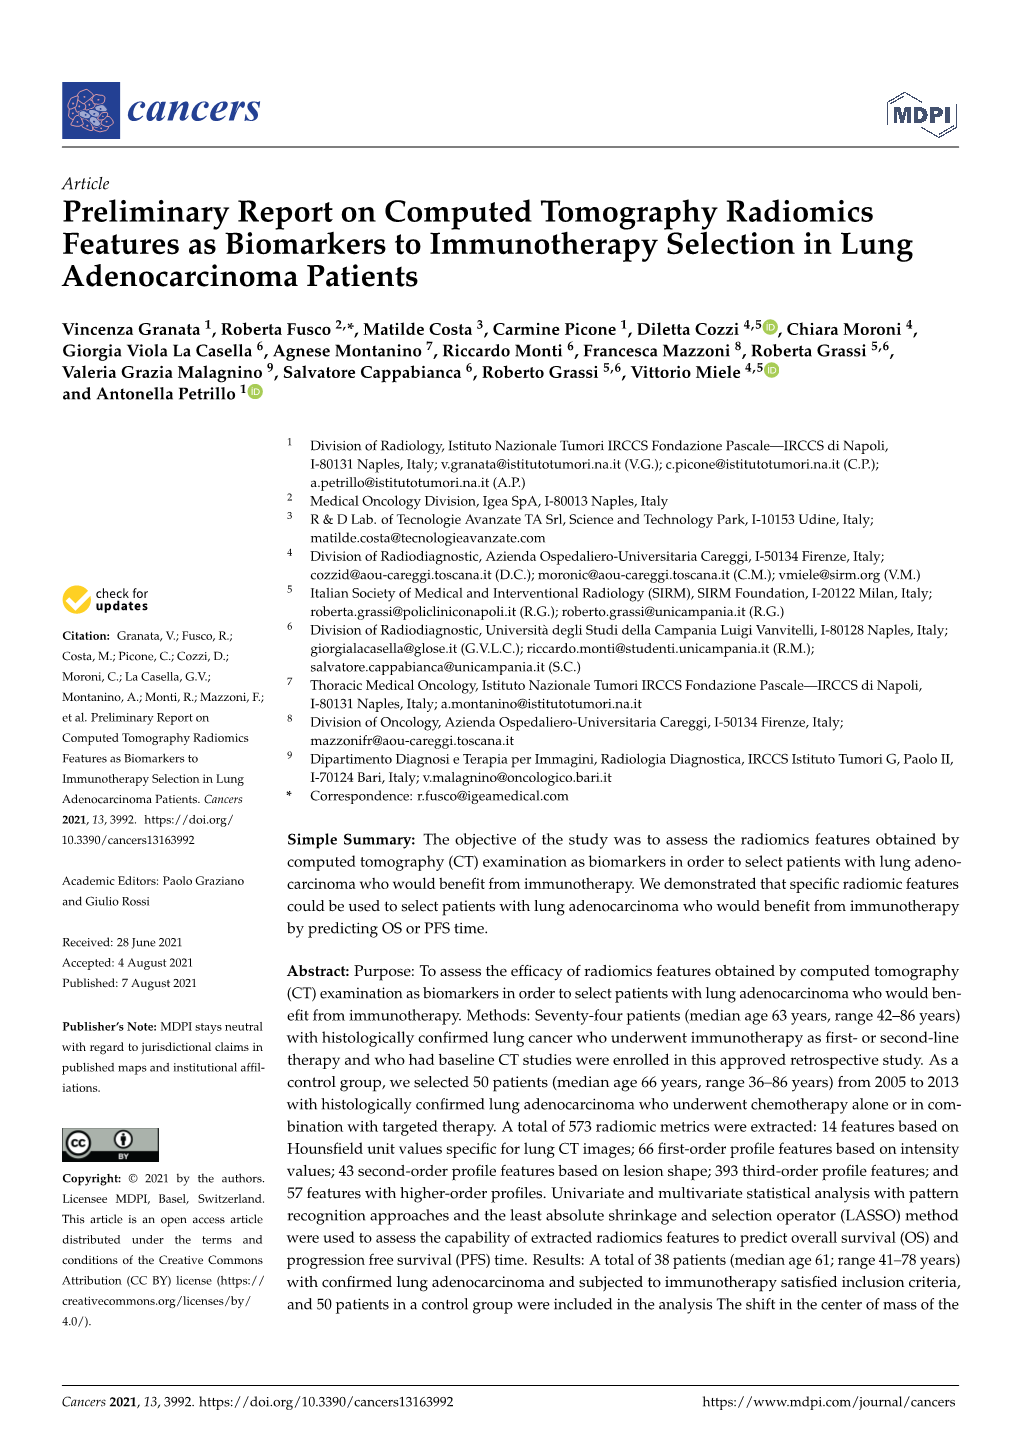 Preliminary Report on Computed Tomography Radiomics Features As Biomarkers to Immunotherapy Selection in Lung Adenocarcinoma Patients